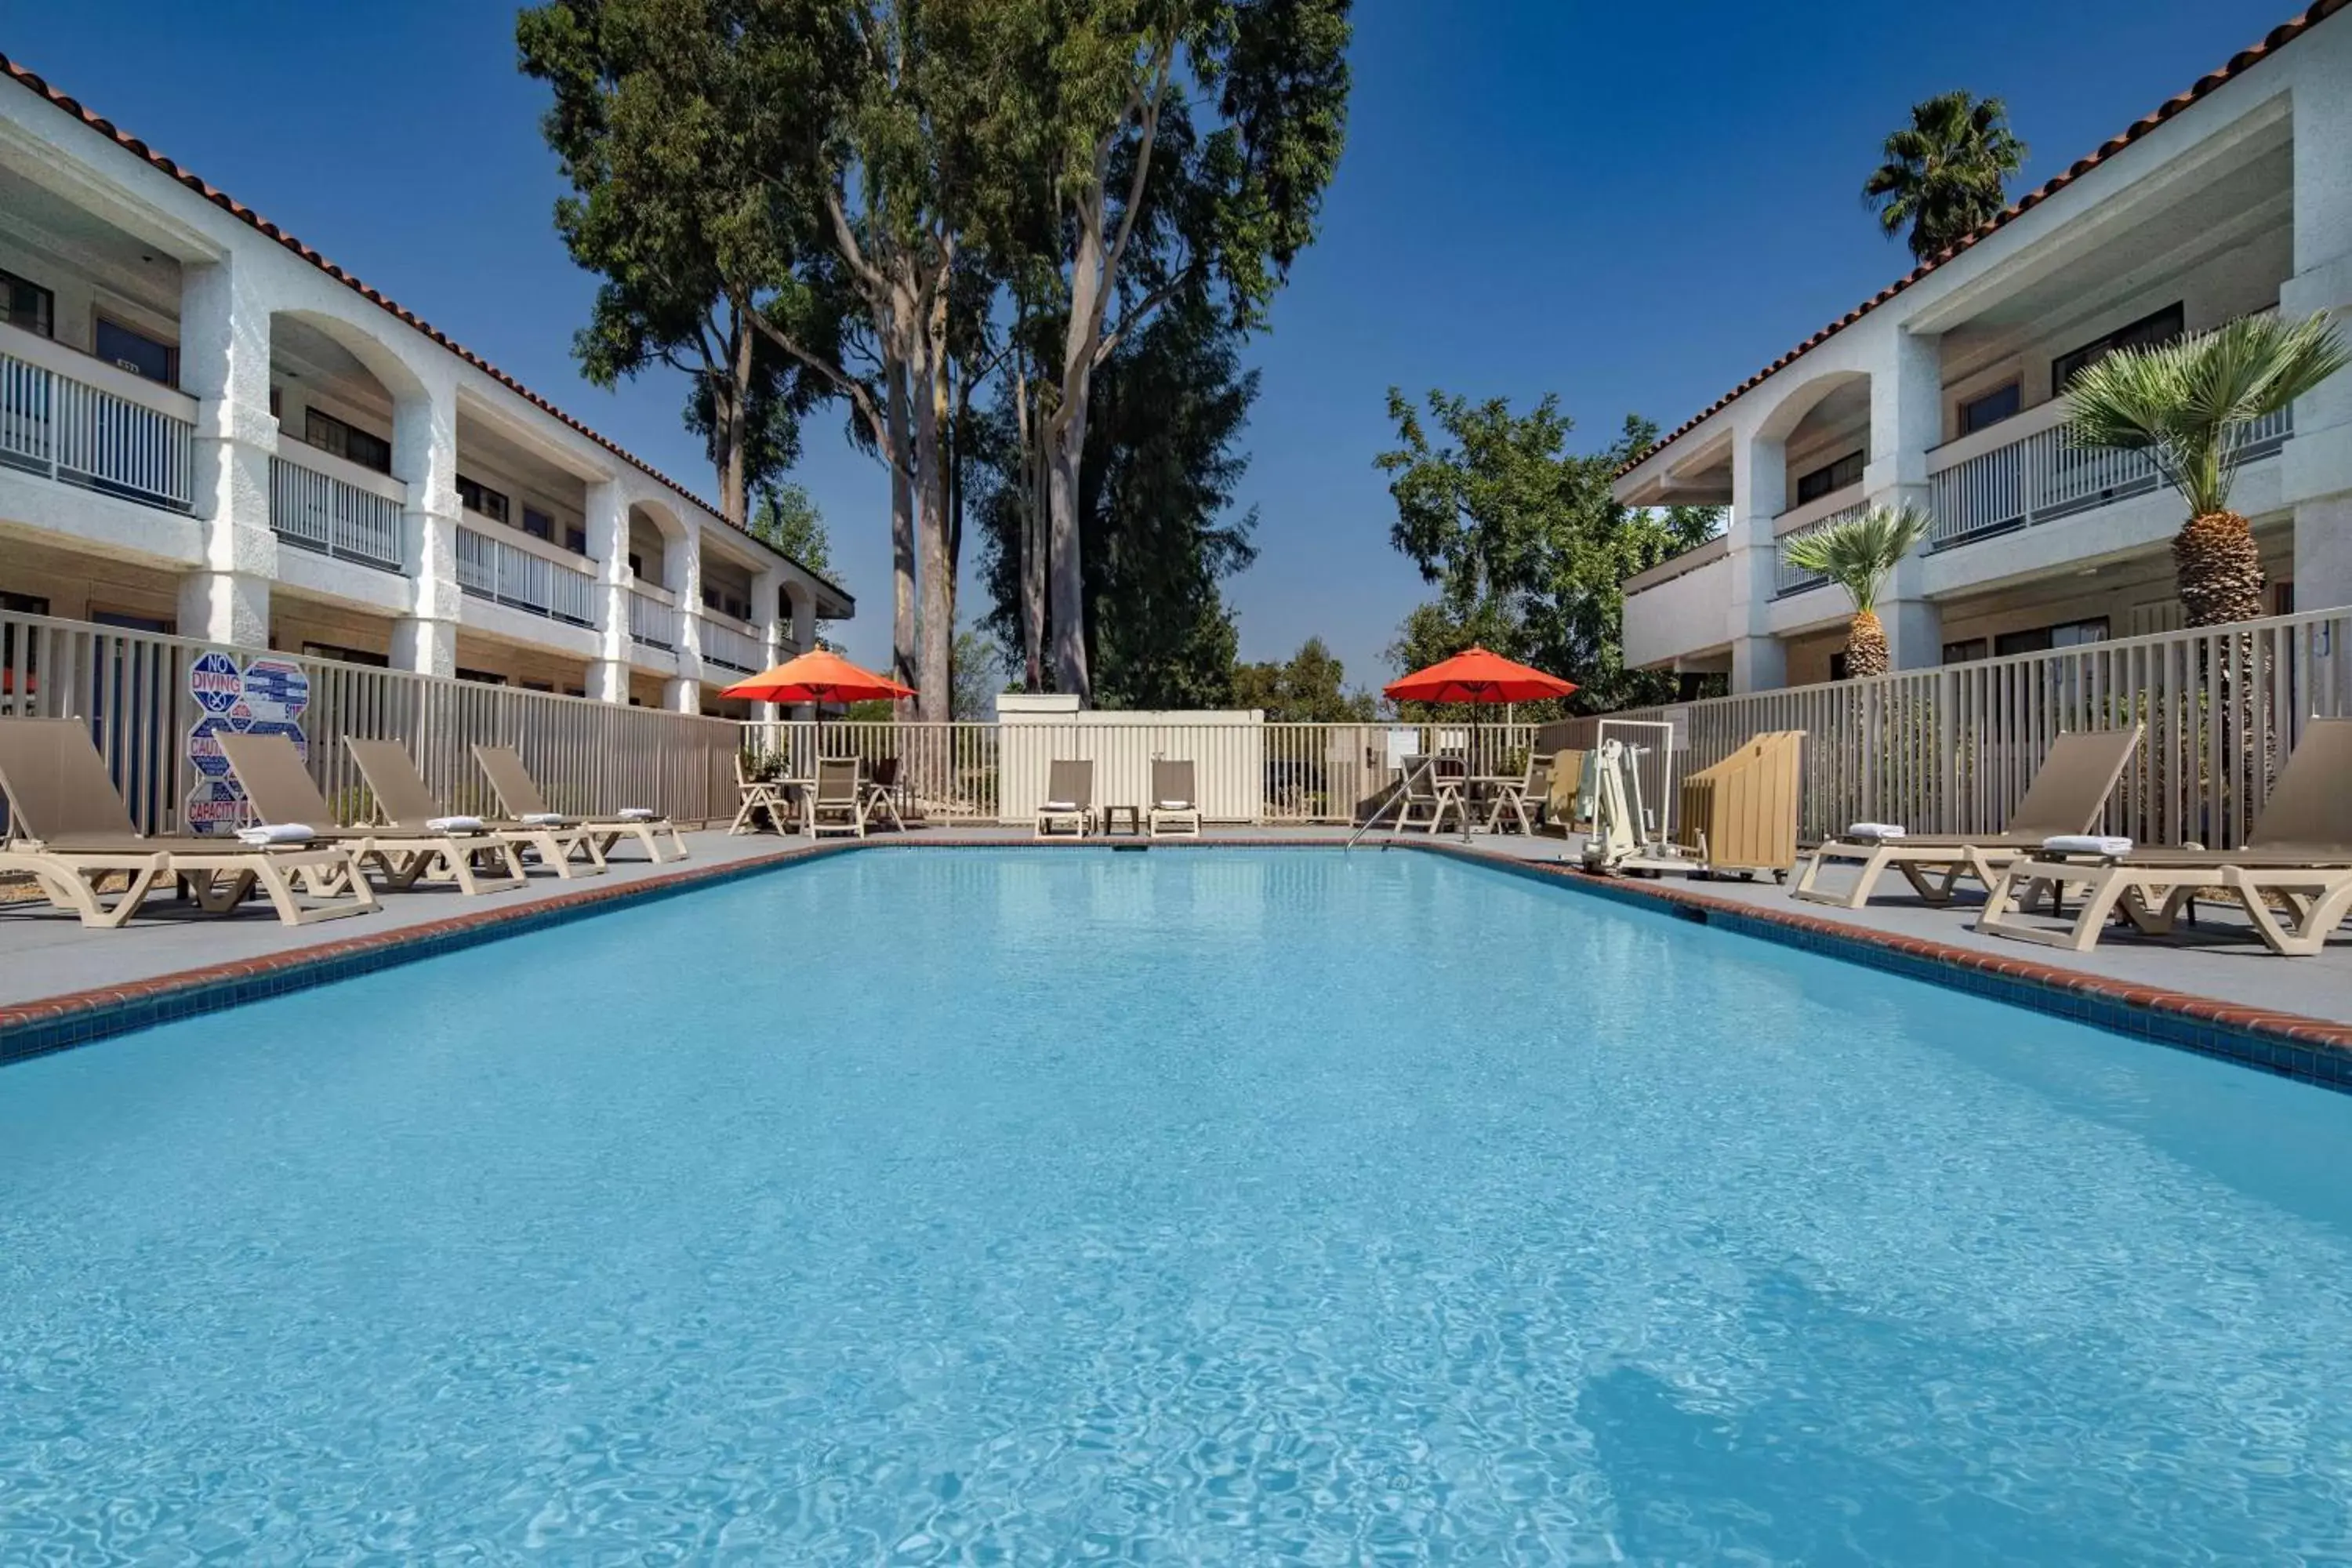 On site, Swimming Pool in Motel 6-Thousand Oaks, CA